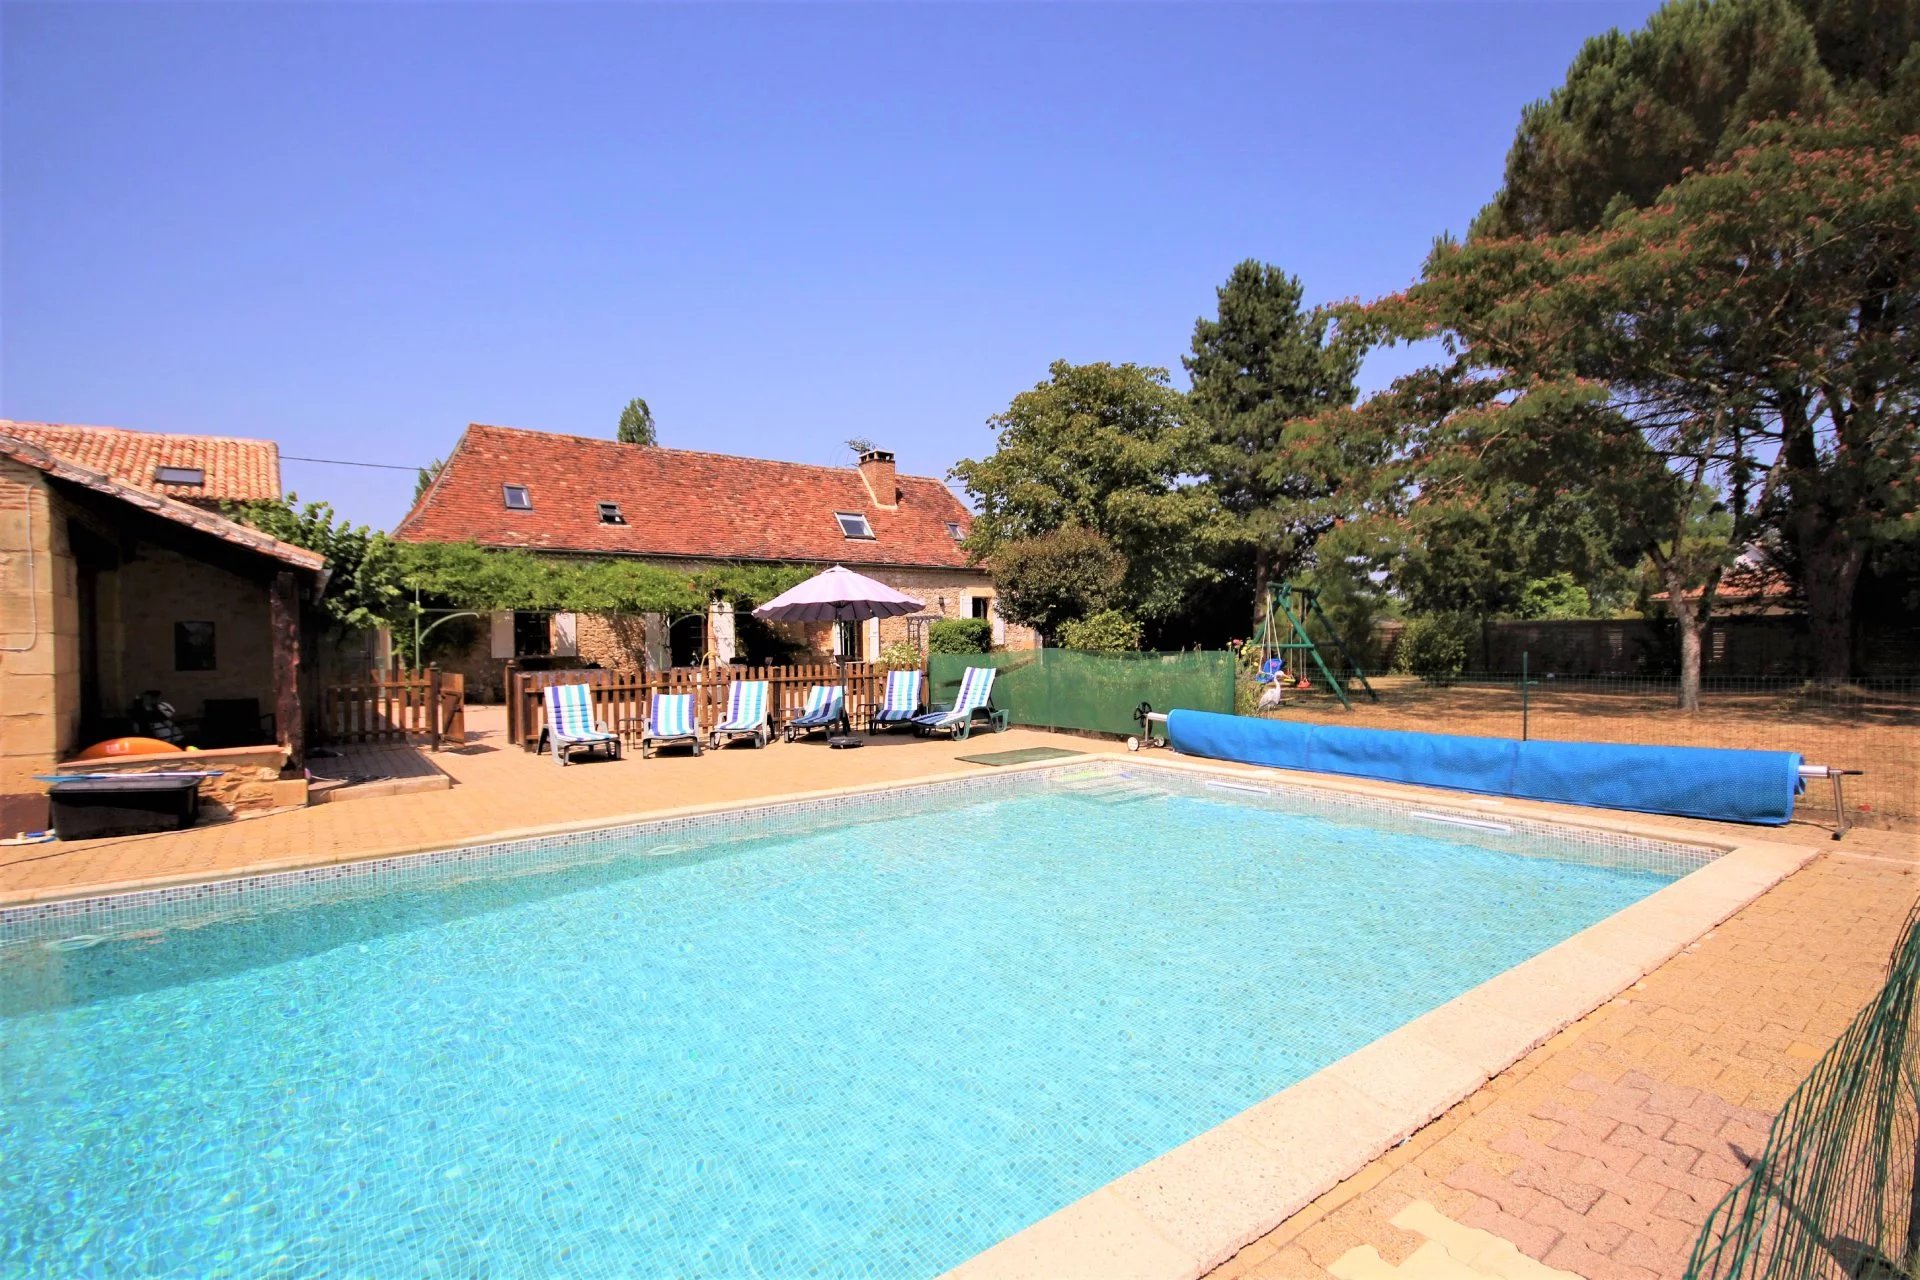 Fabulous family home or income generating with large pool near Bergerac